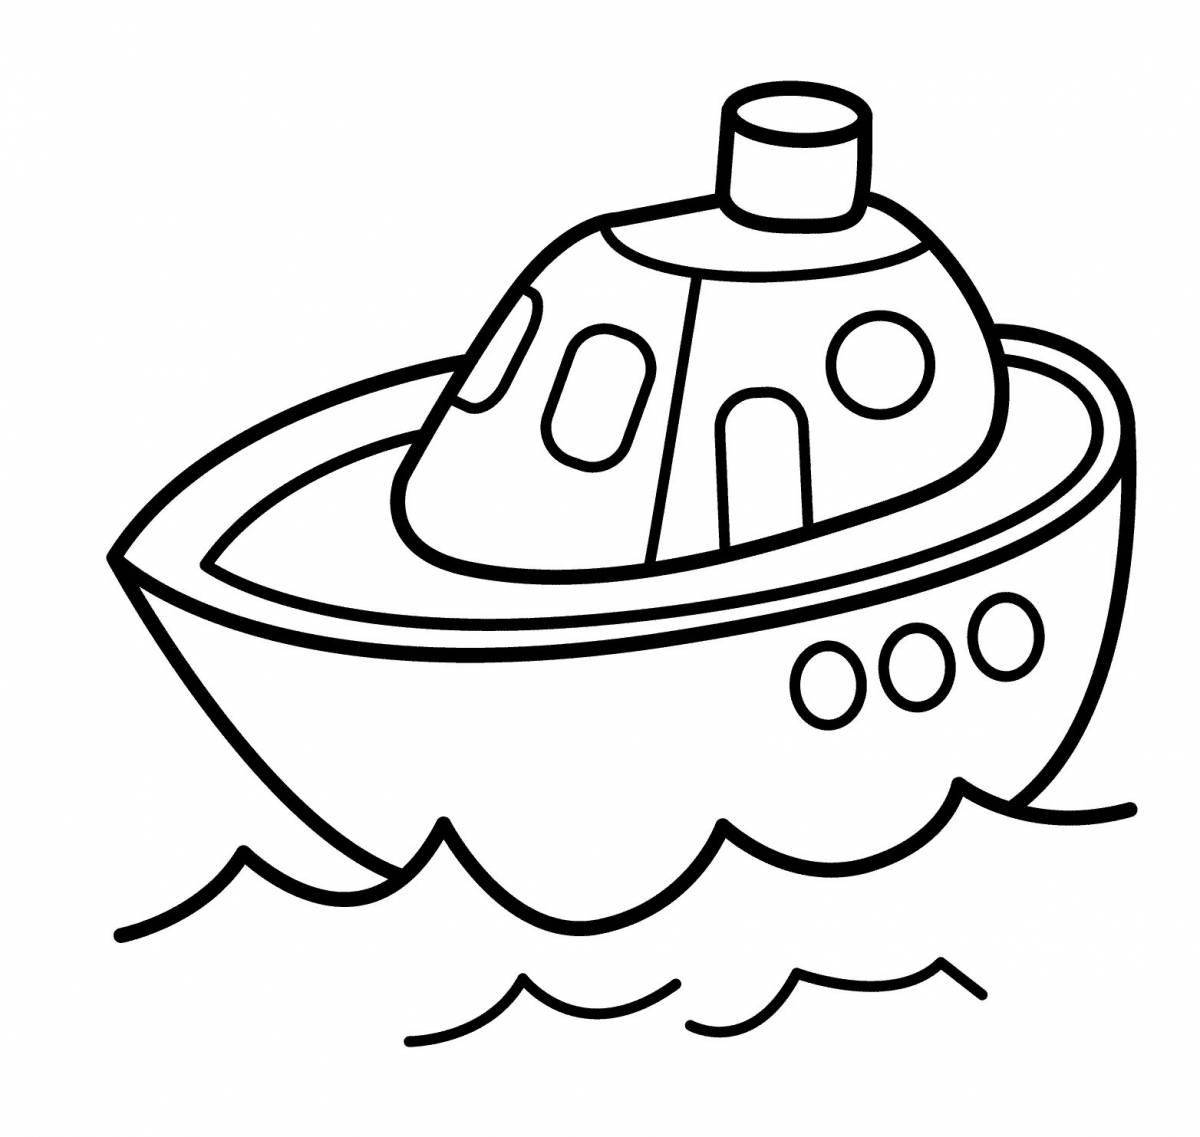 Colorful boat coloring page for 2-3 year olds